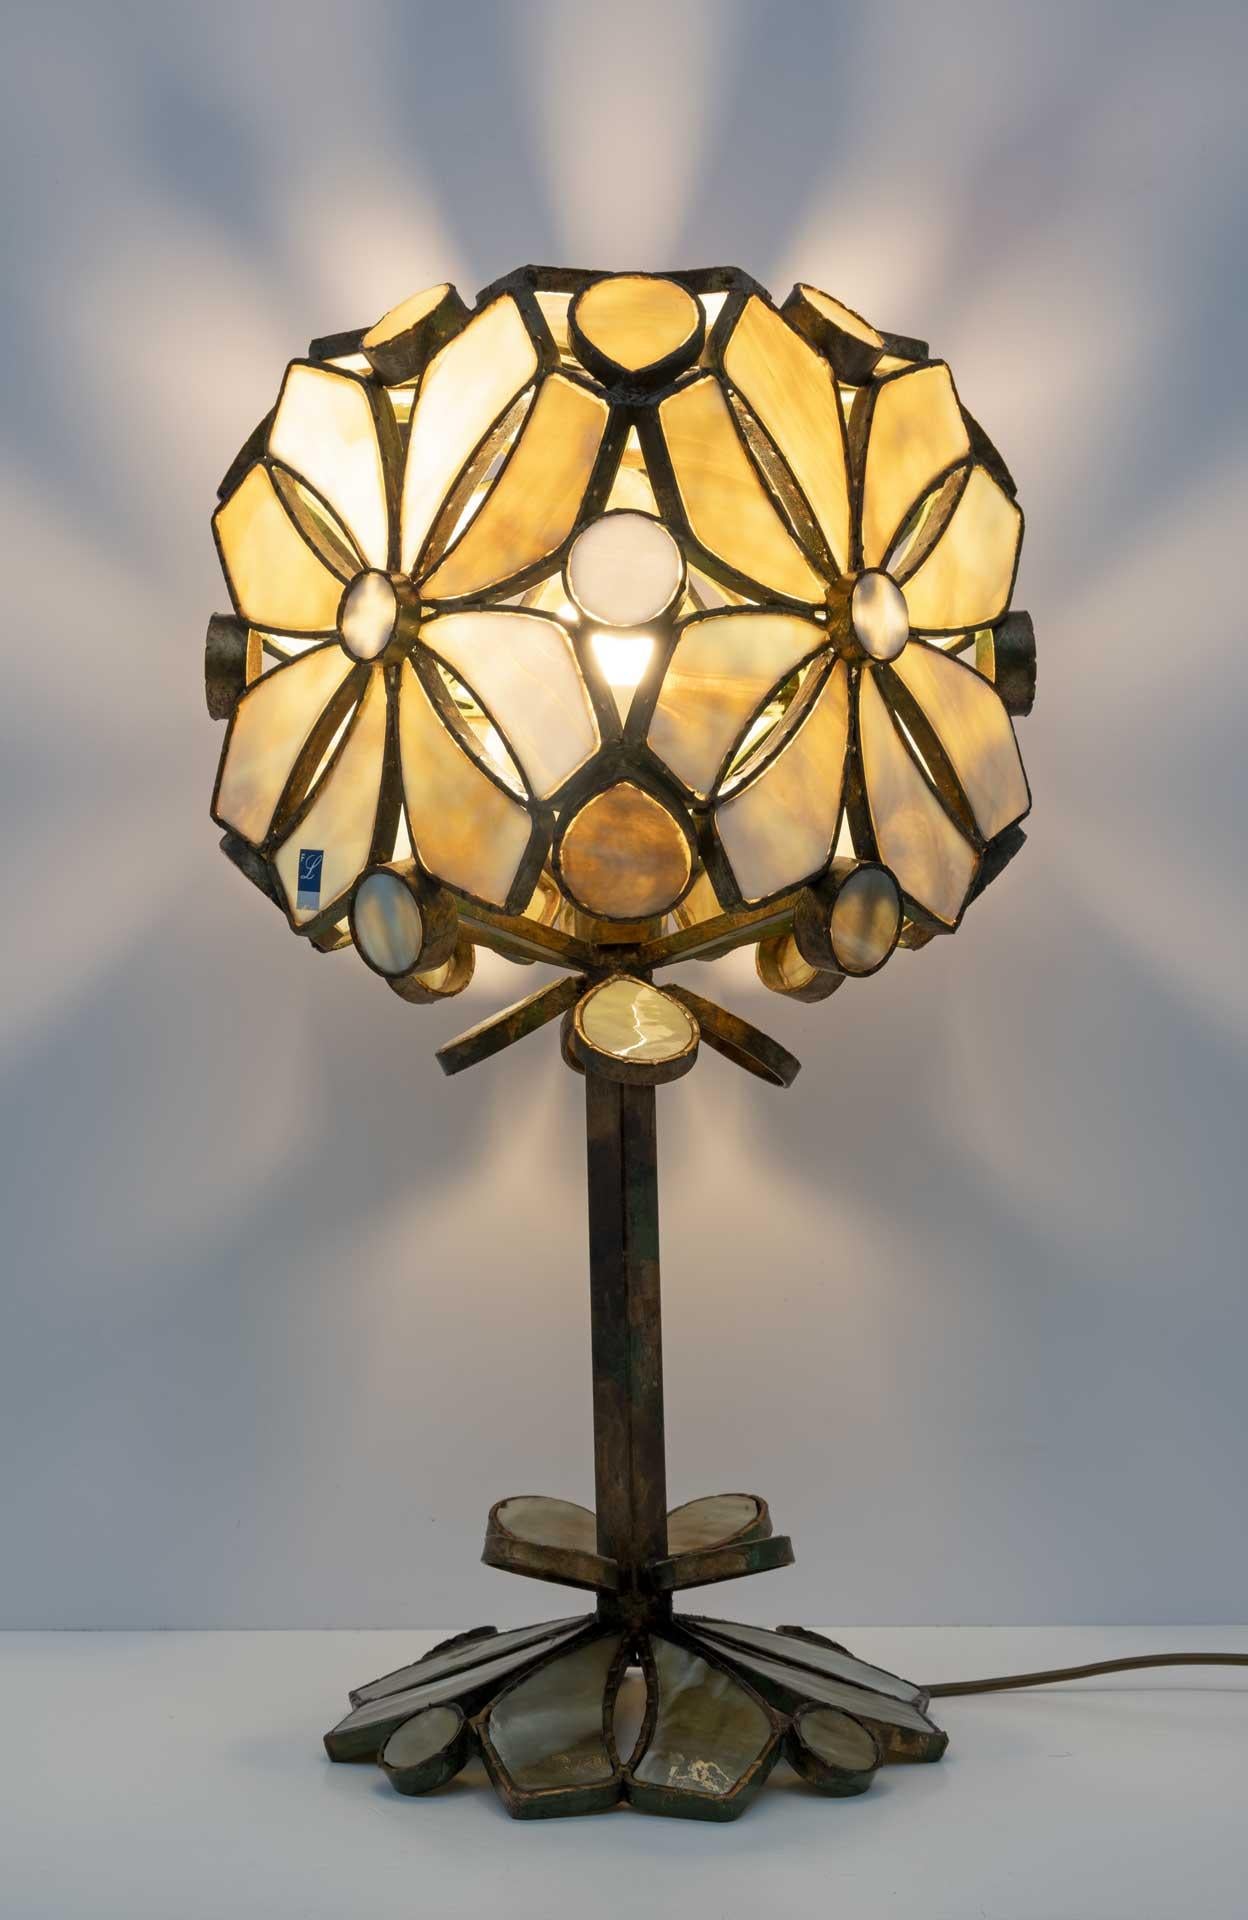 Rare Murano glass table lamp designed and made by Longobard in 1970. The structure is in hand-crafted gilded wrought iron with the insertion of colored glass paste. Original logo, first production.